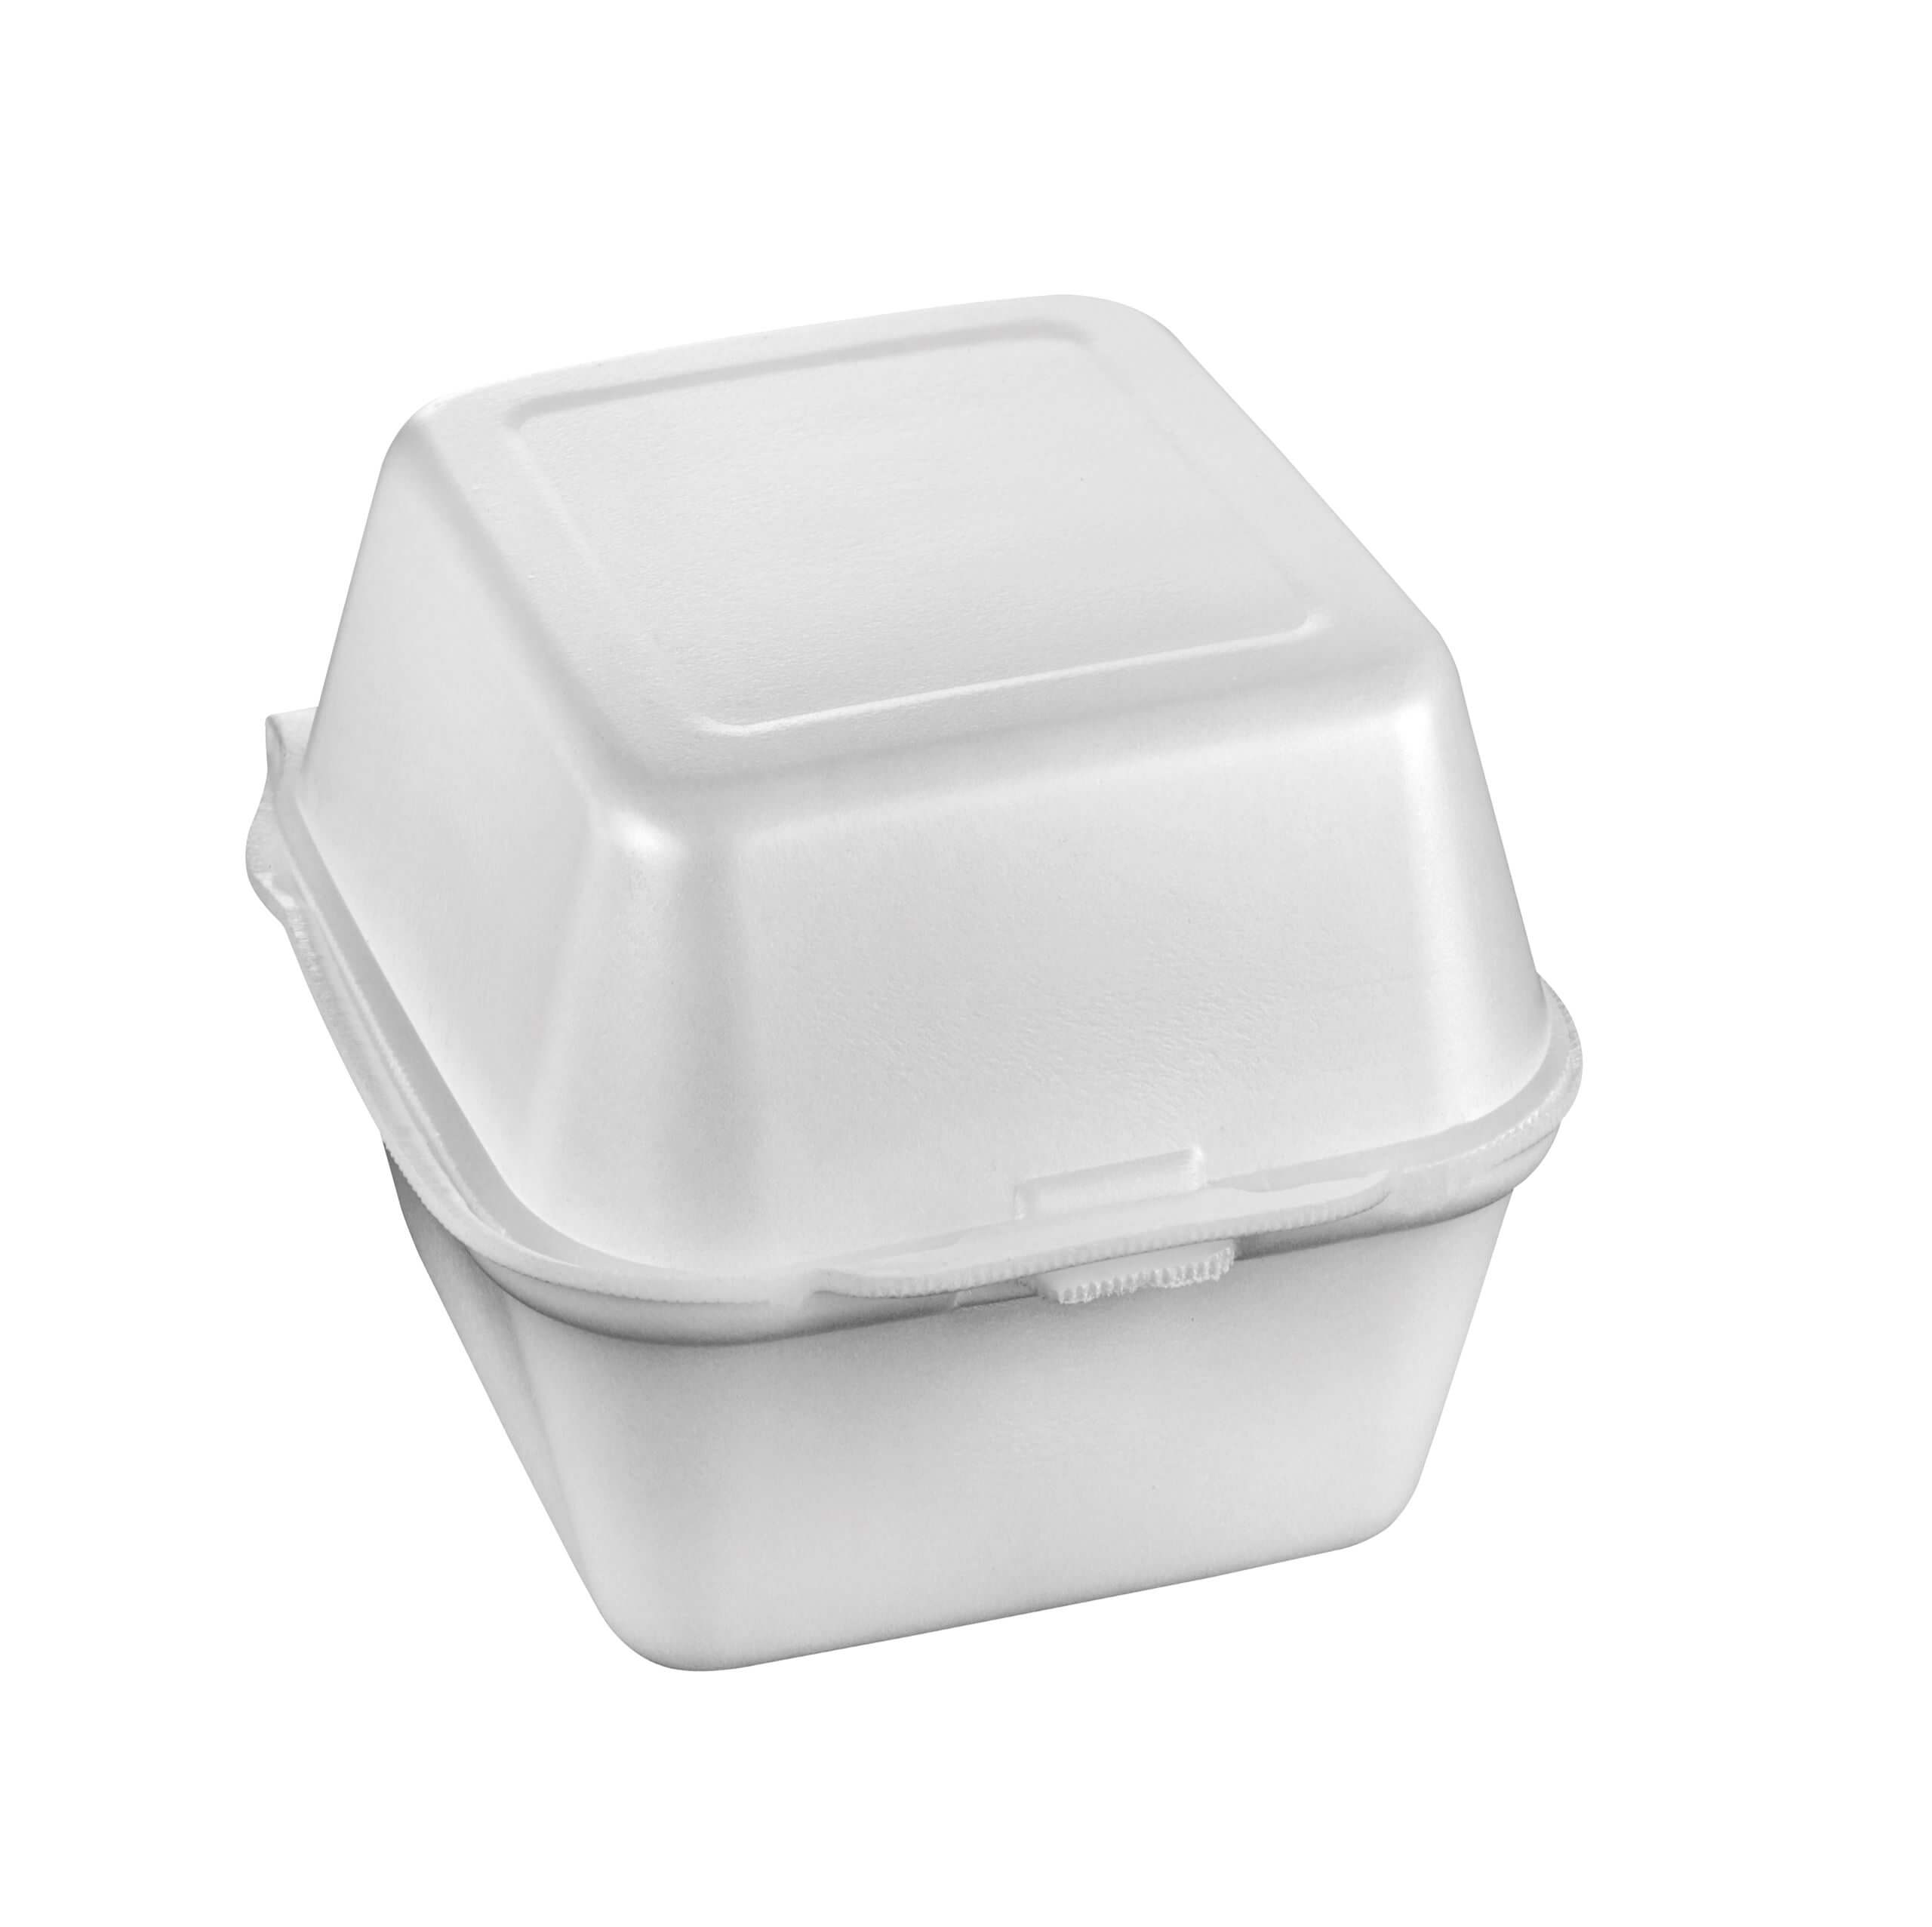 An image of a Polystyrene Clamshell Box.